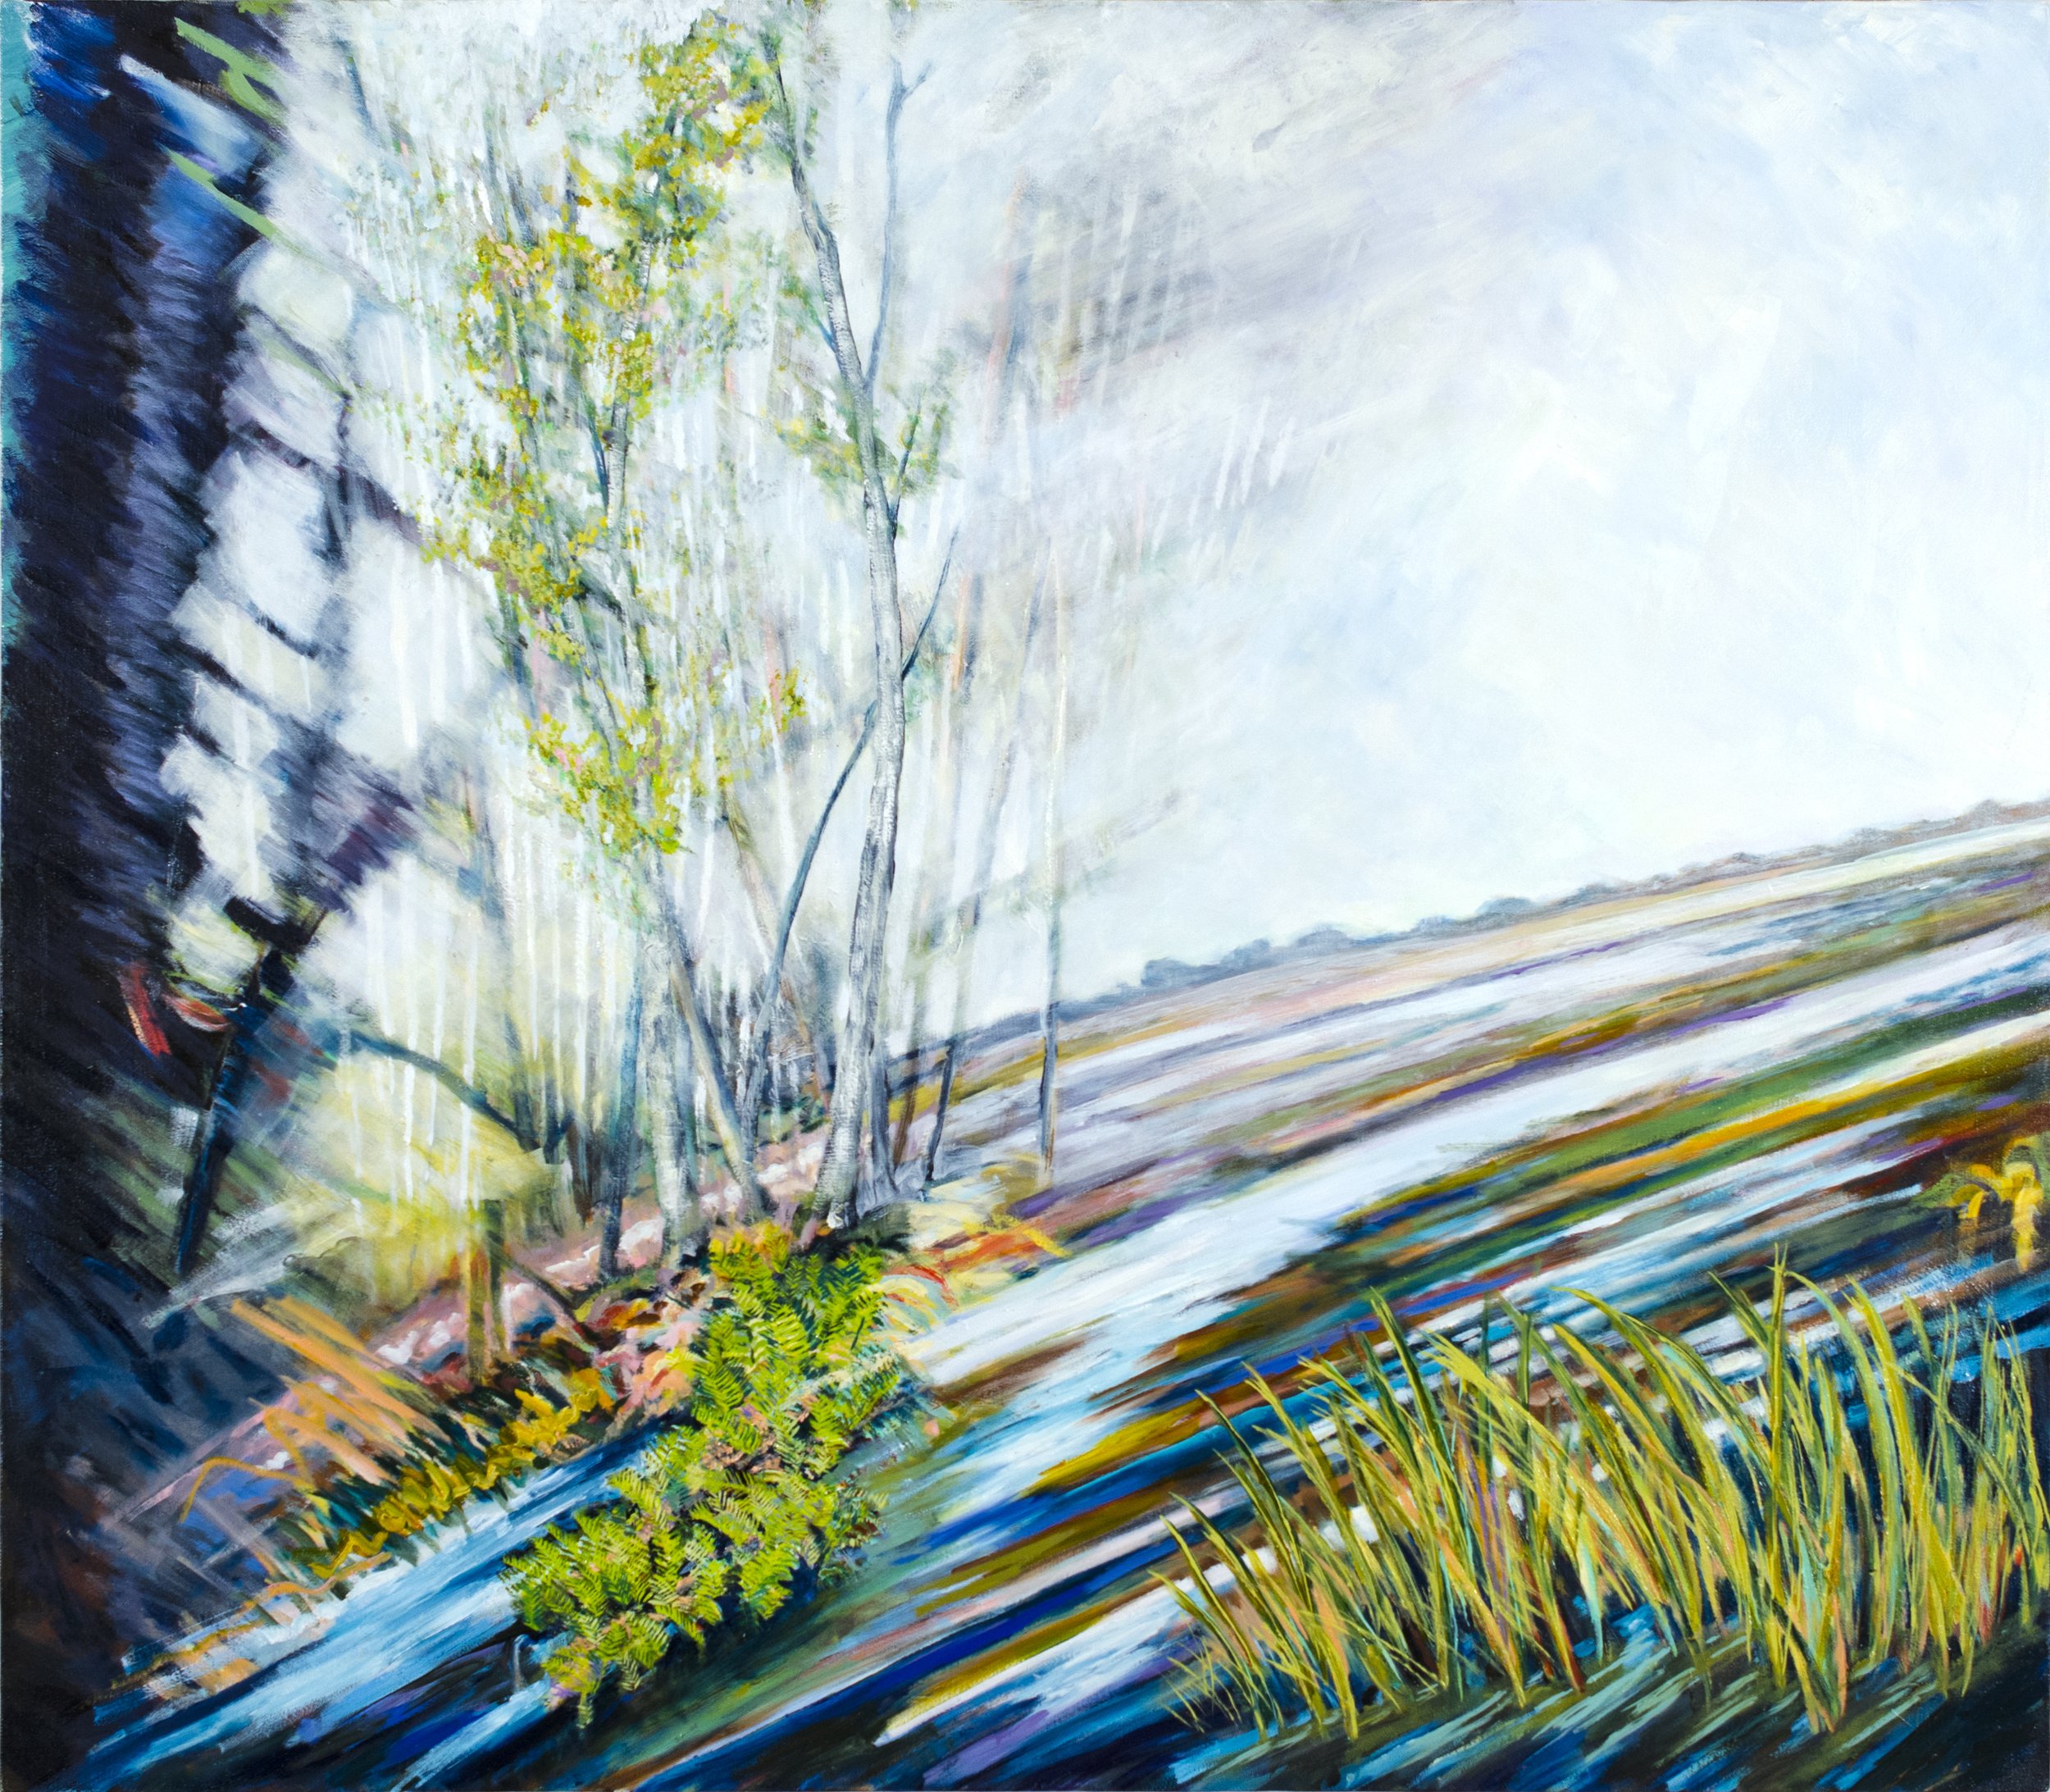 Bolinas Lagoon II 42 x 48 inches, Oil on canvas  $6800